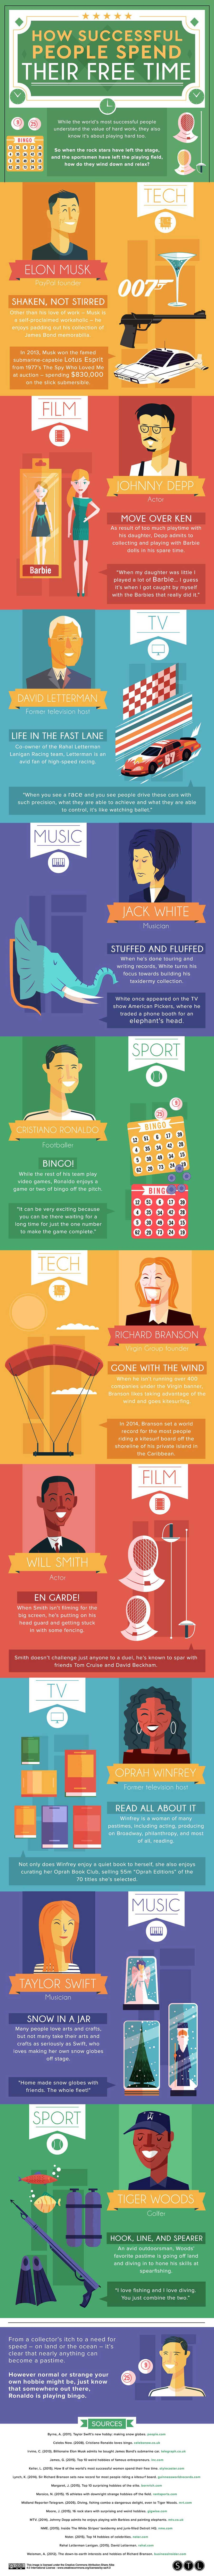 how-successful-people-spend-their-free-time